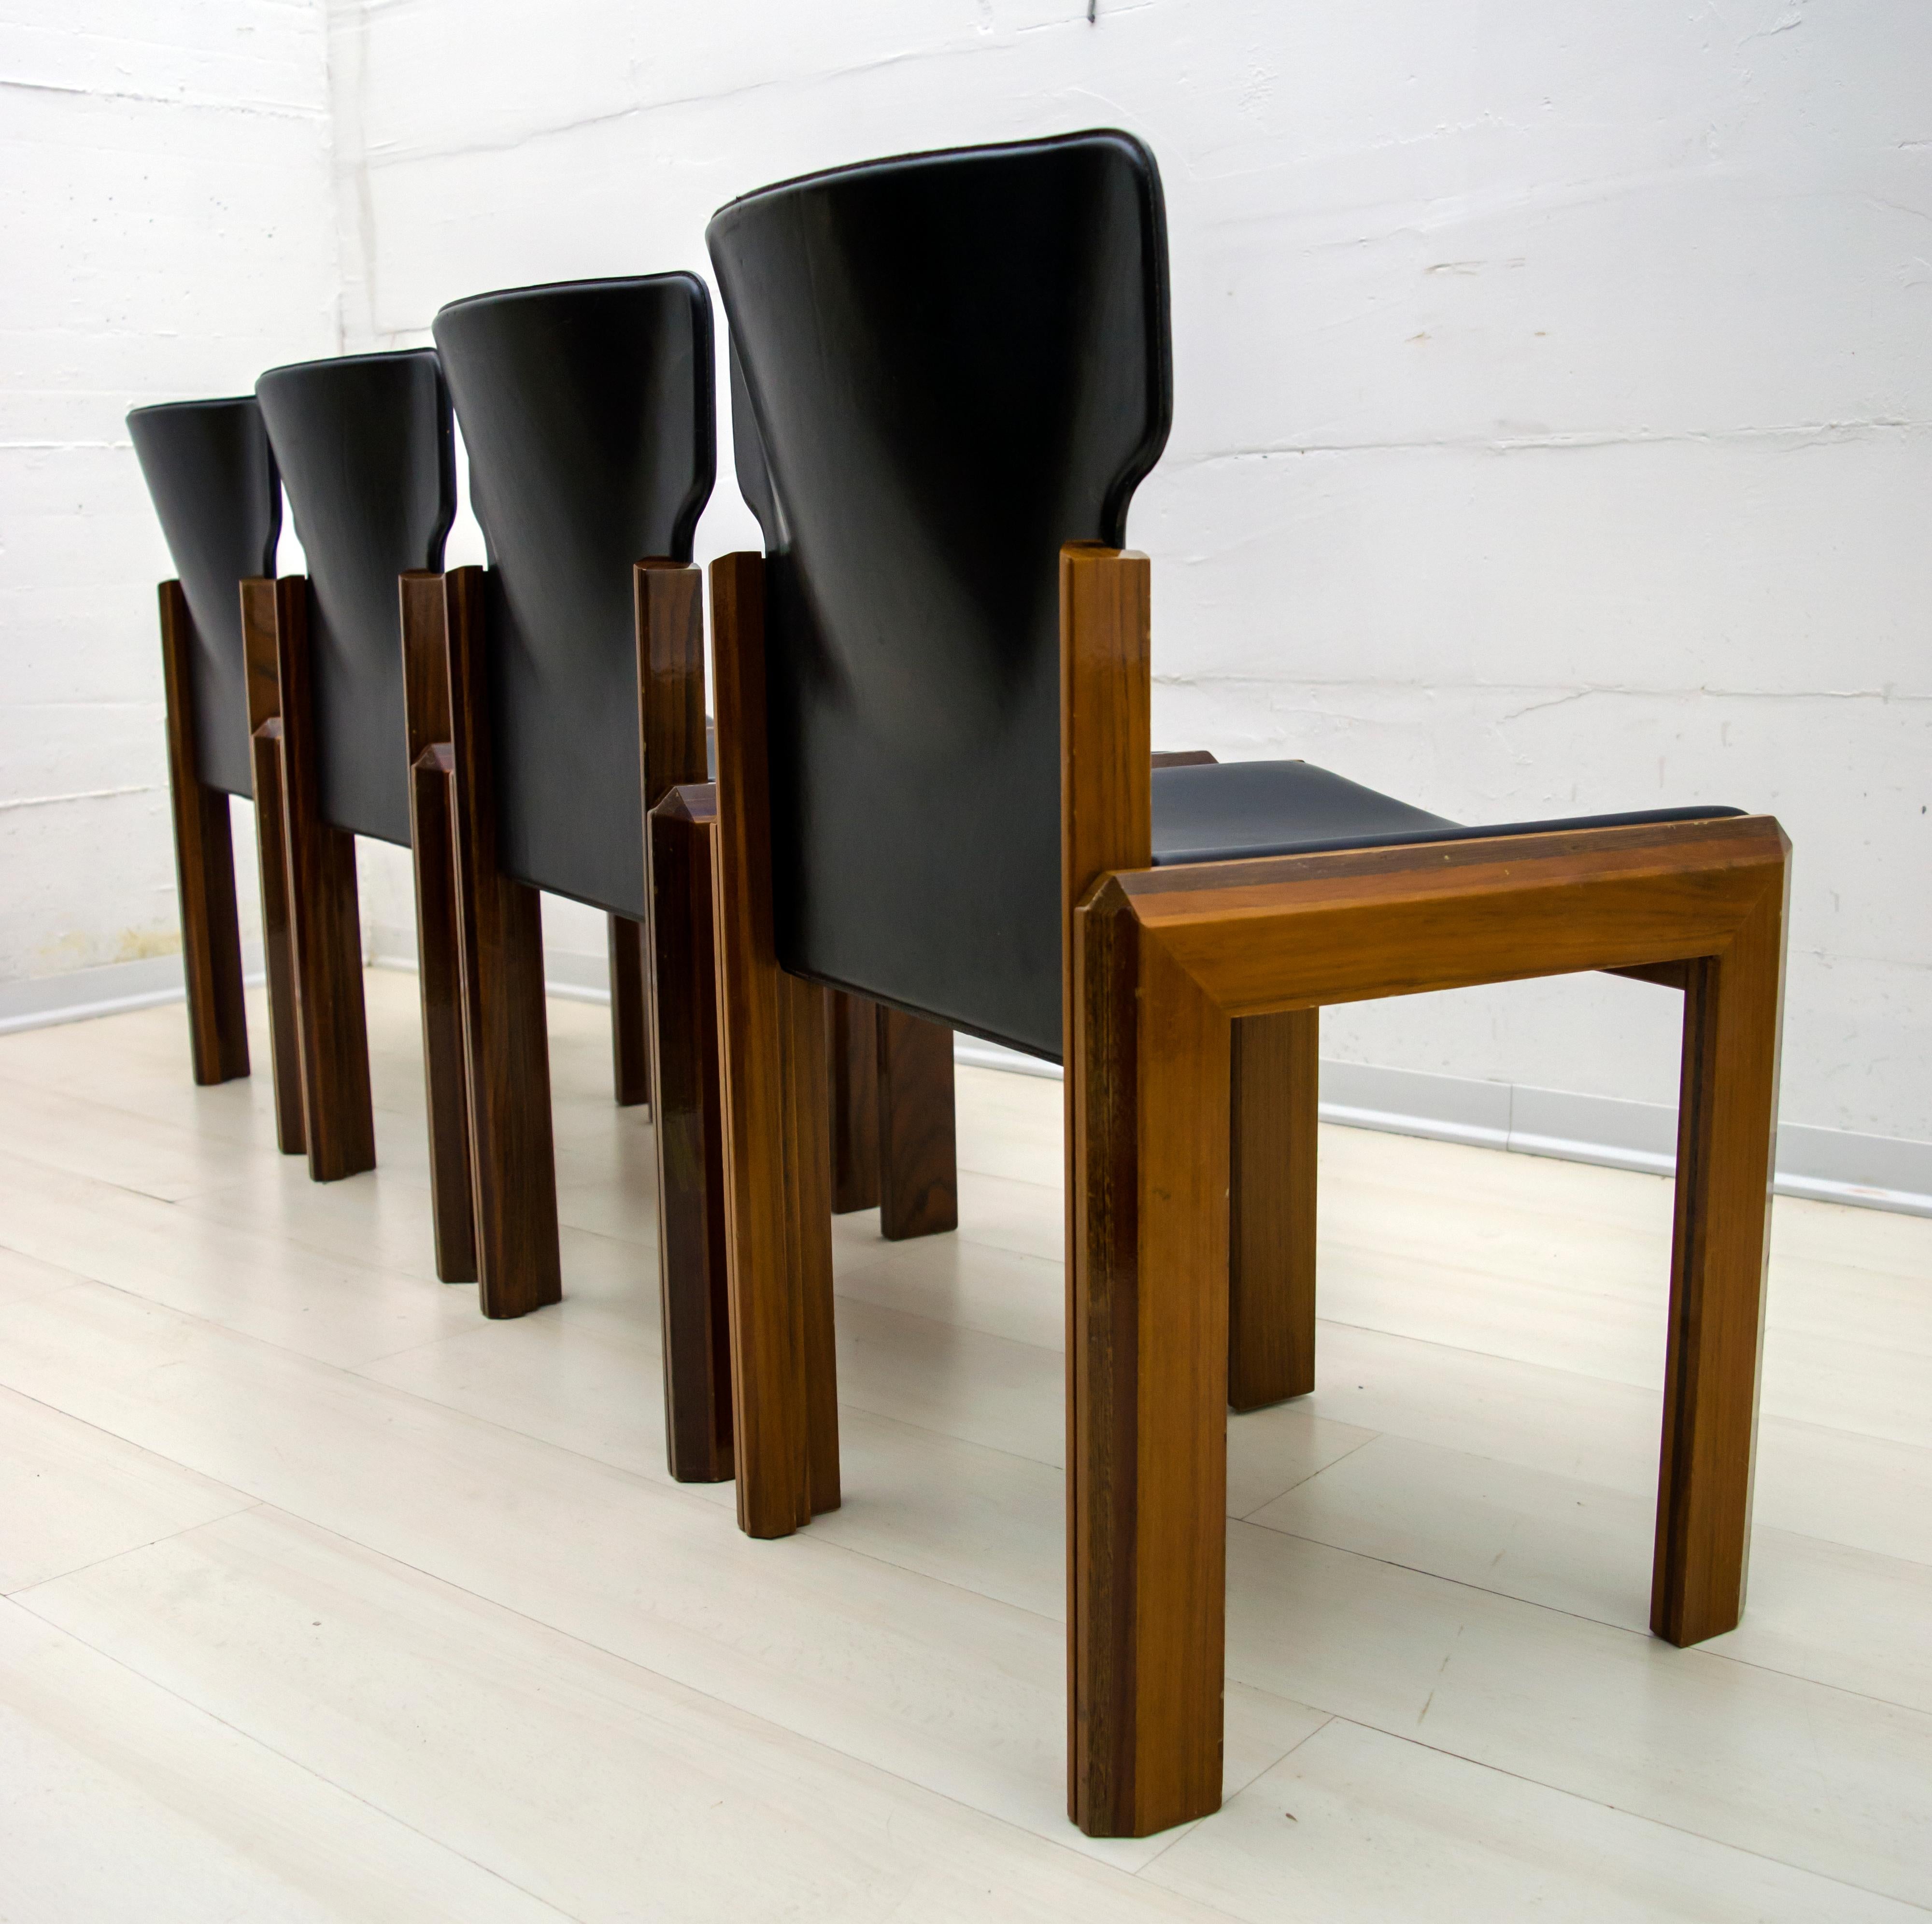 These dining chairs were designed by Luciano Frigerio. The chairs are veneered with various woods: Walnut, Mahogany, Padouk, Wenge.
There is also a table combined with chairs, always produced by Frigerio

Luciano Frigerio was born in Desio in 1928.